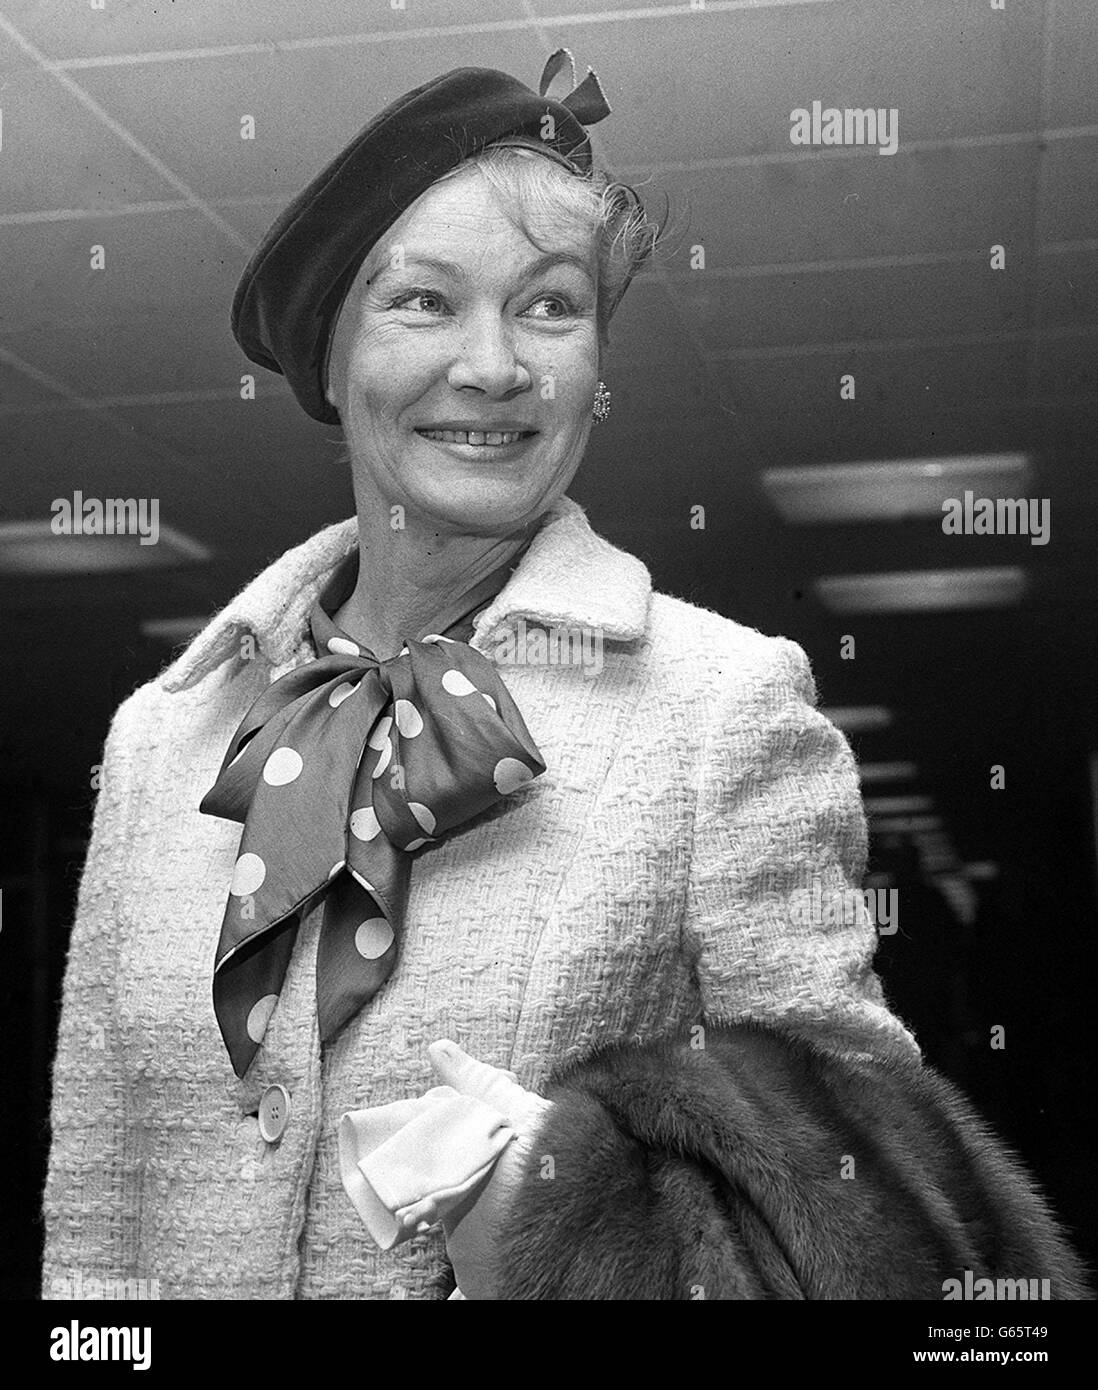 Veronica Lake, the 1940s film star with the blonde peek-a-boo hairstyle, now recovered from the fever which prevented her from coming to appear in a recent Eamonn Andrews TV show, on arrival at Heathrow airport. Stock Photo